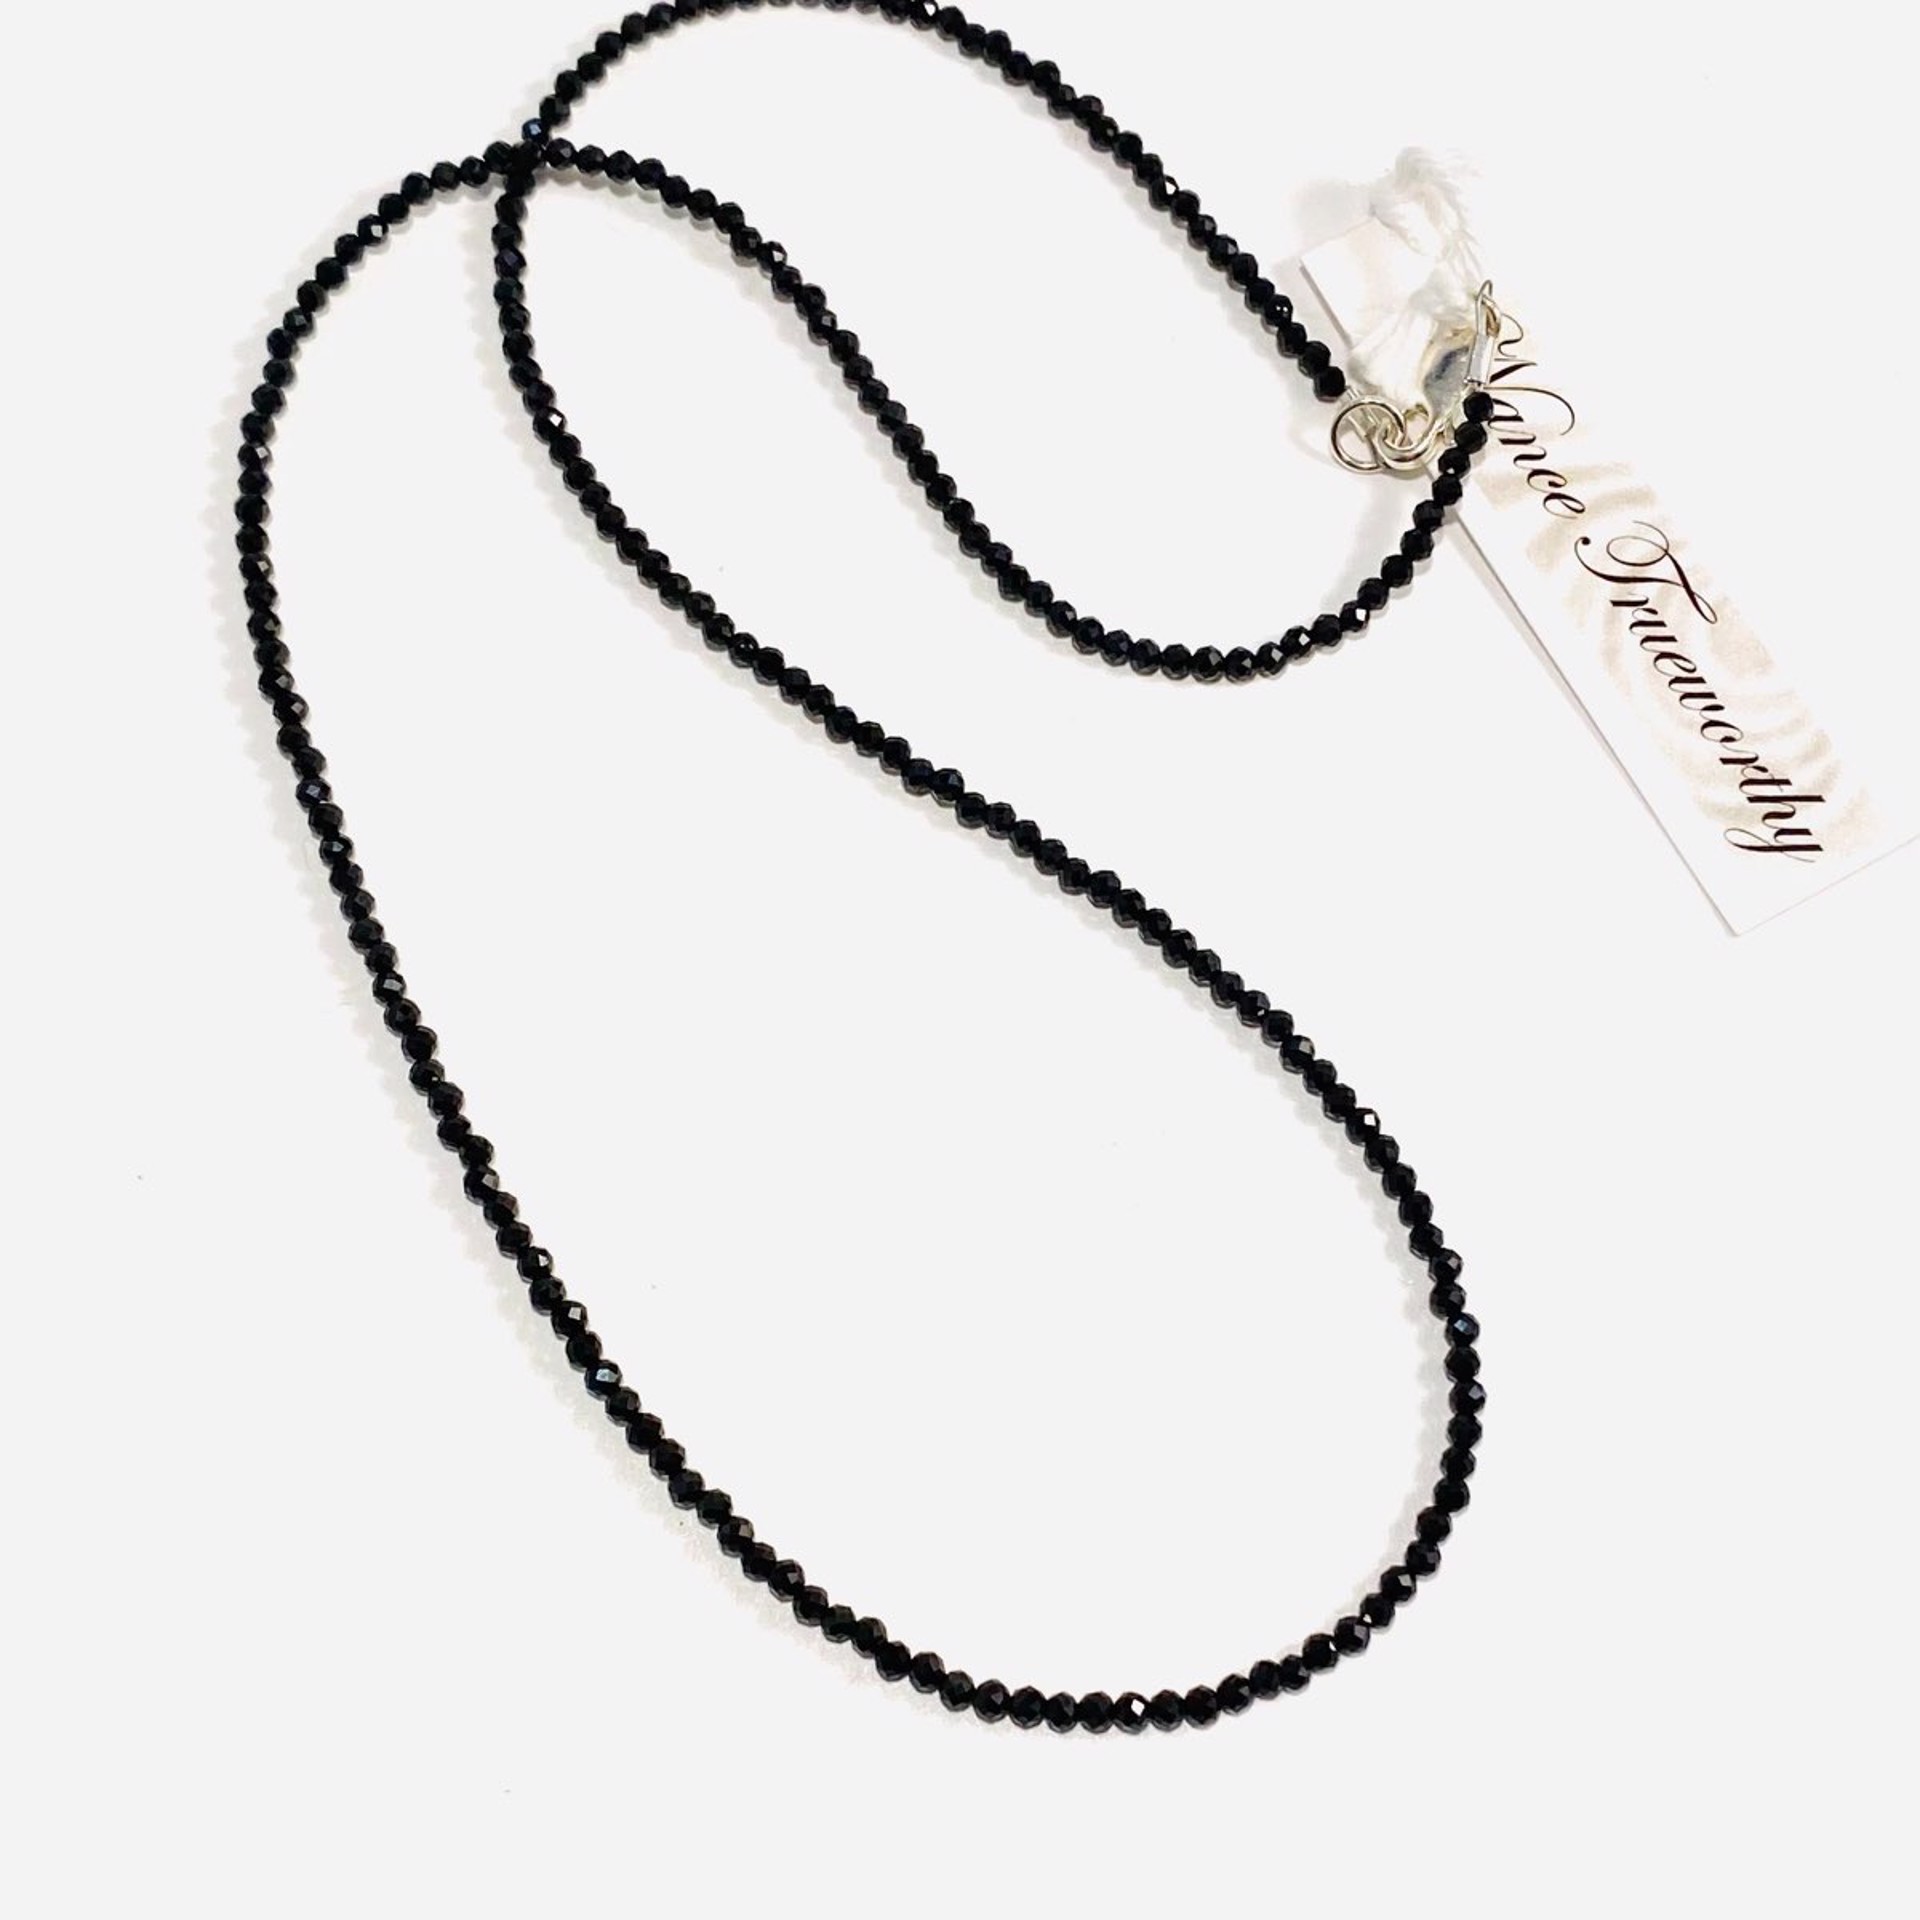 NT22-164 Faceted Black Spinel Strand Necklace by Nance Trueworthy